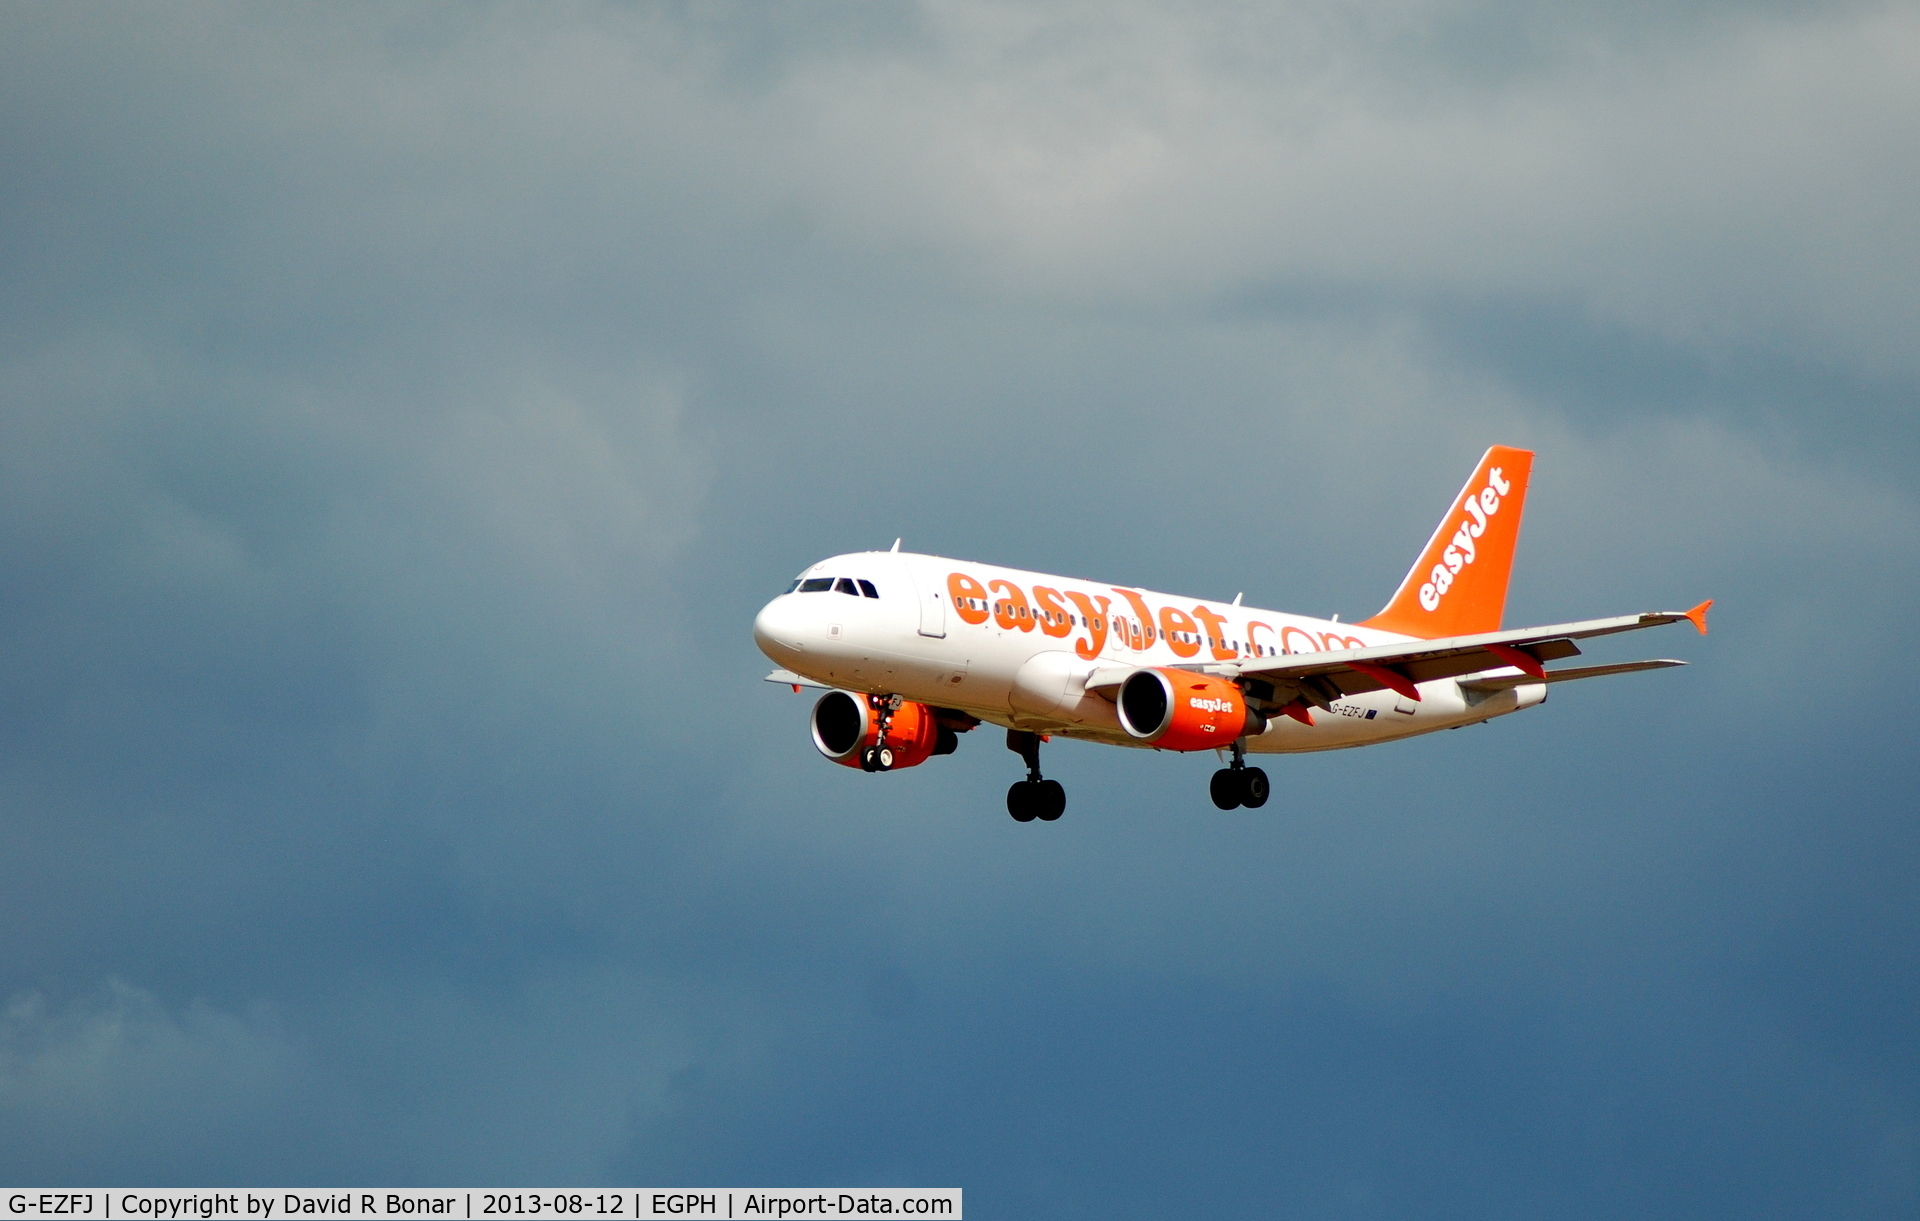 G-EZFJ, 2009 Airbus A319-111 C/N 4040, Short finals in-front of an agry sky